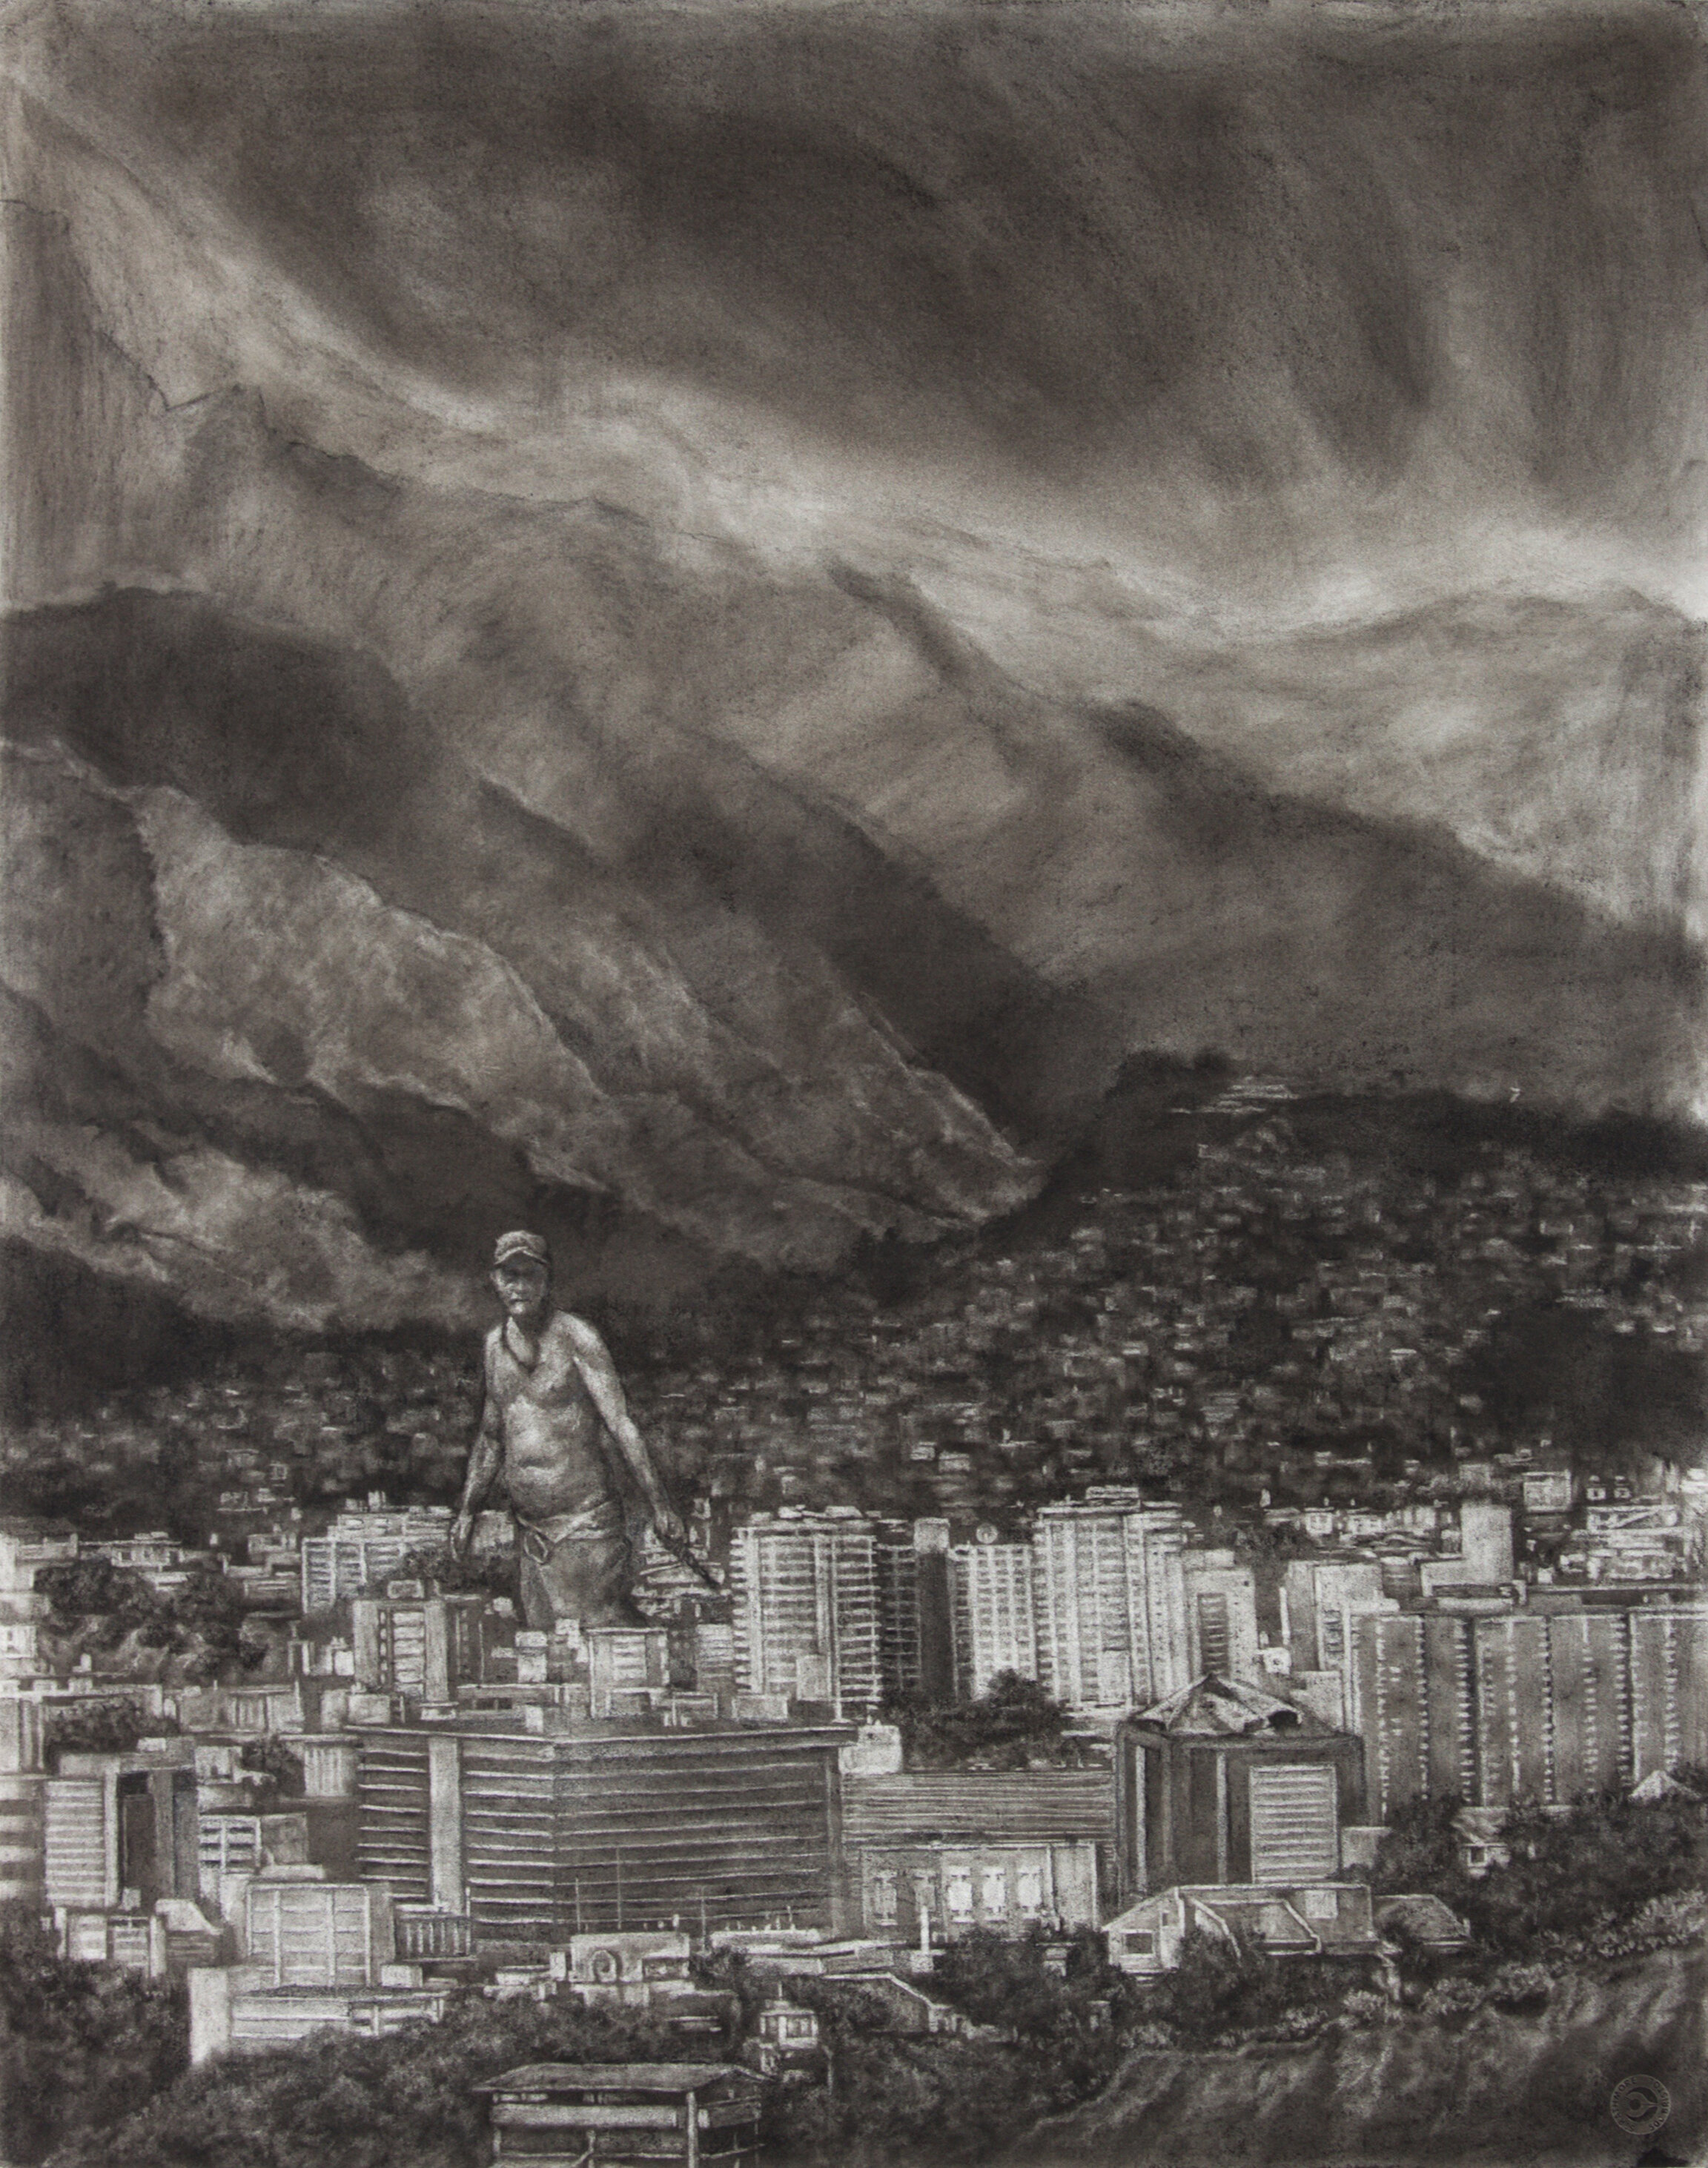    Inhibition  , charcoal on paper, 23 x 29 inches, 2015   